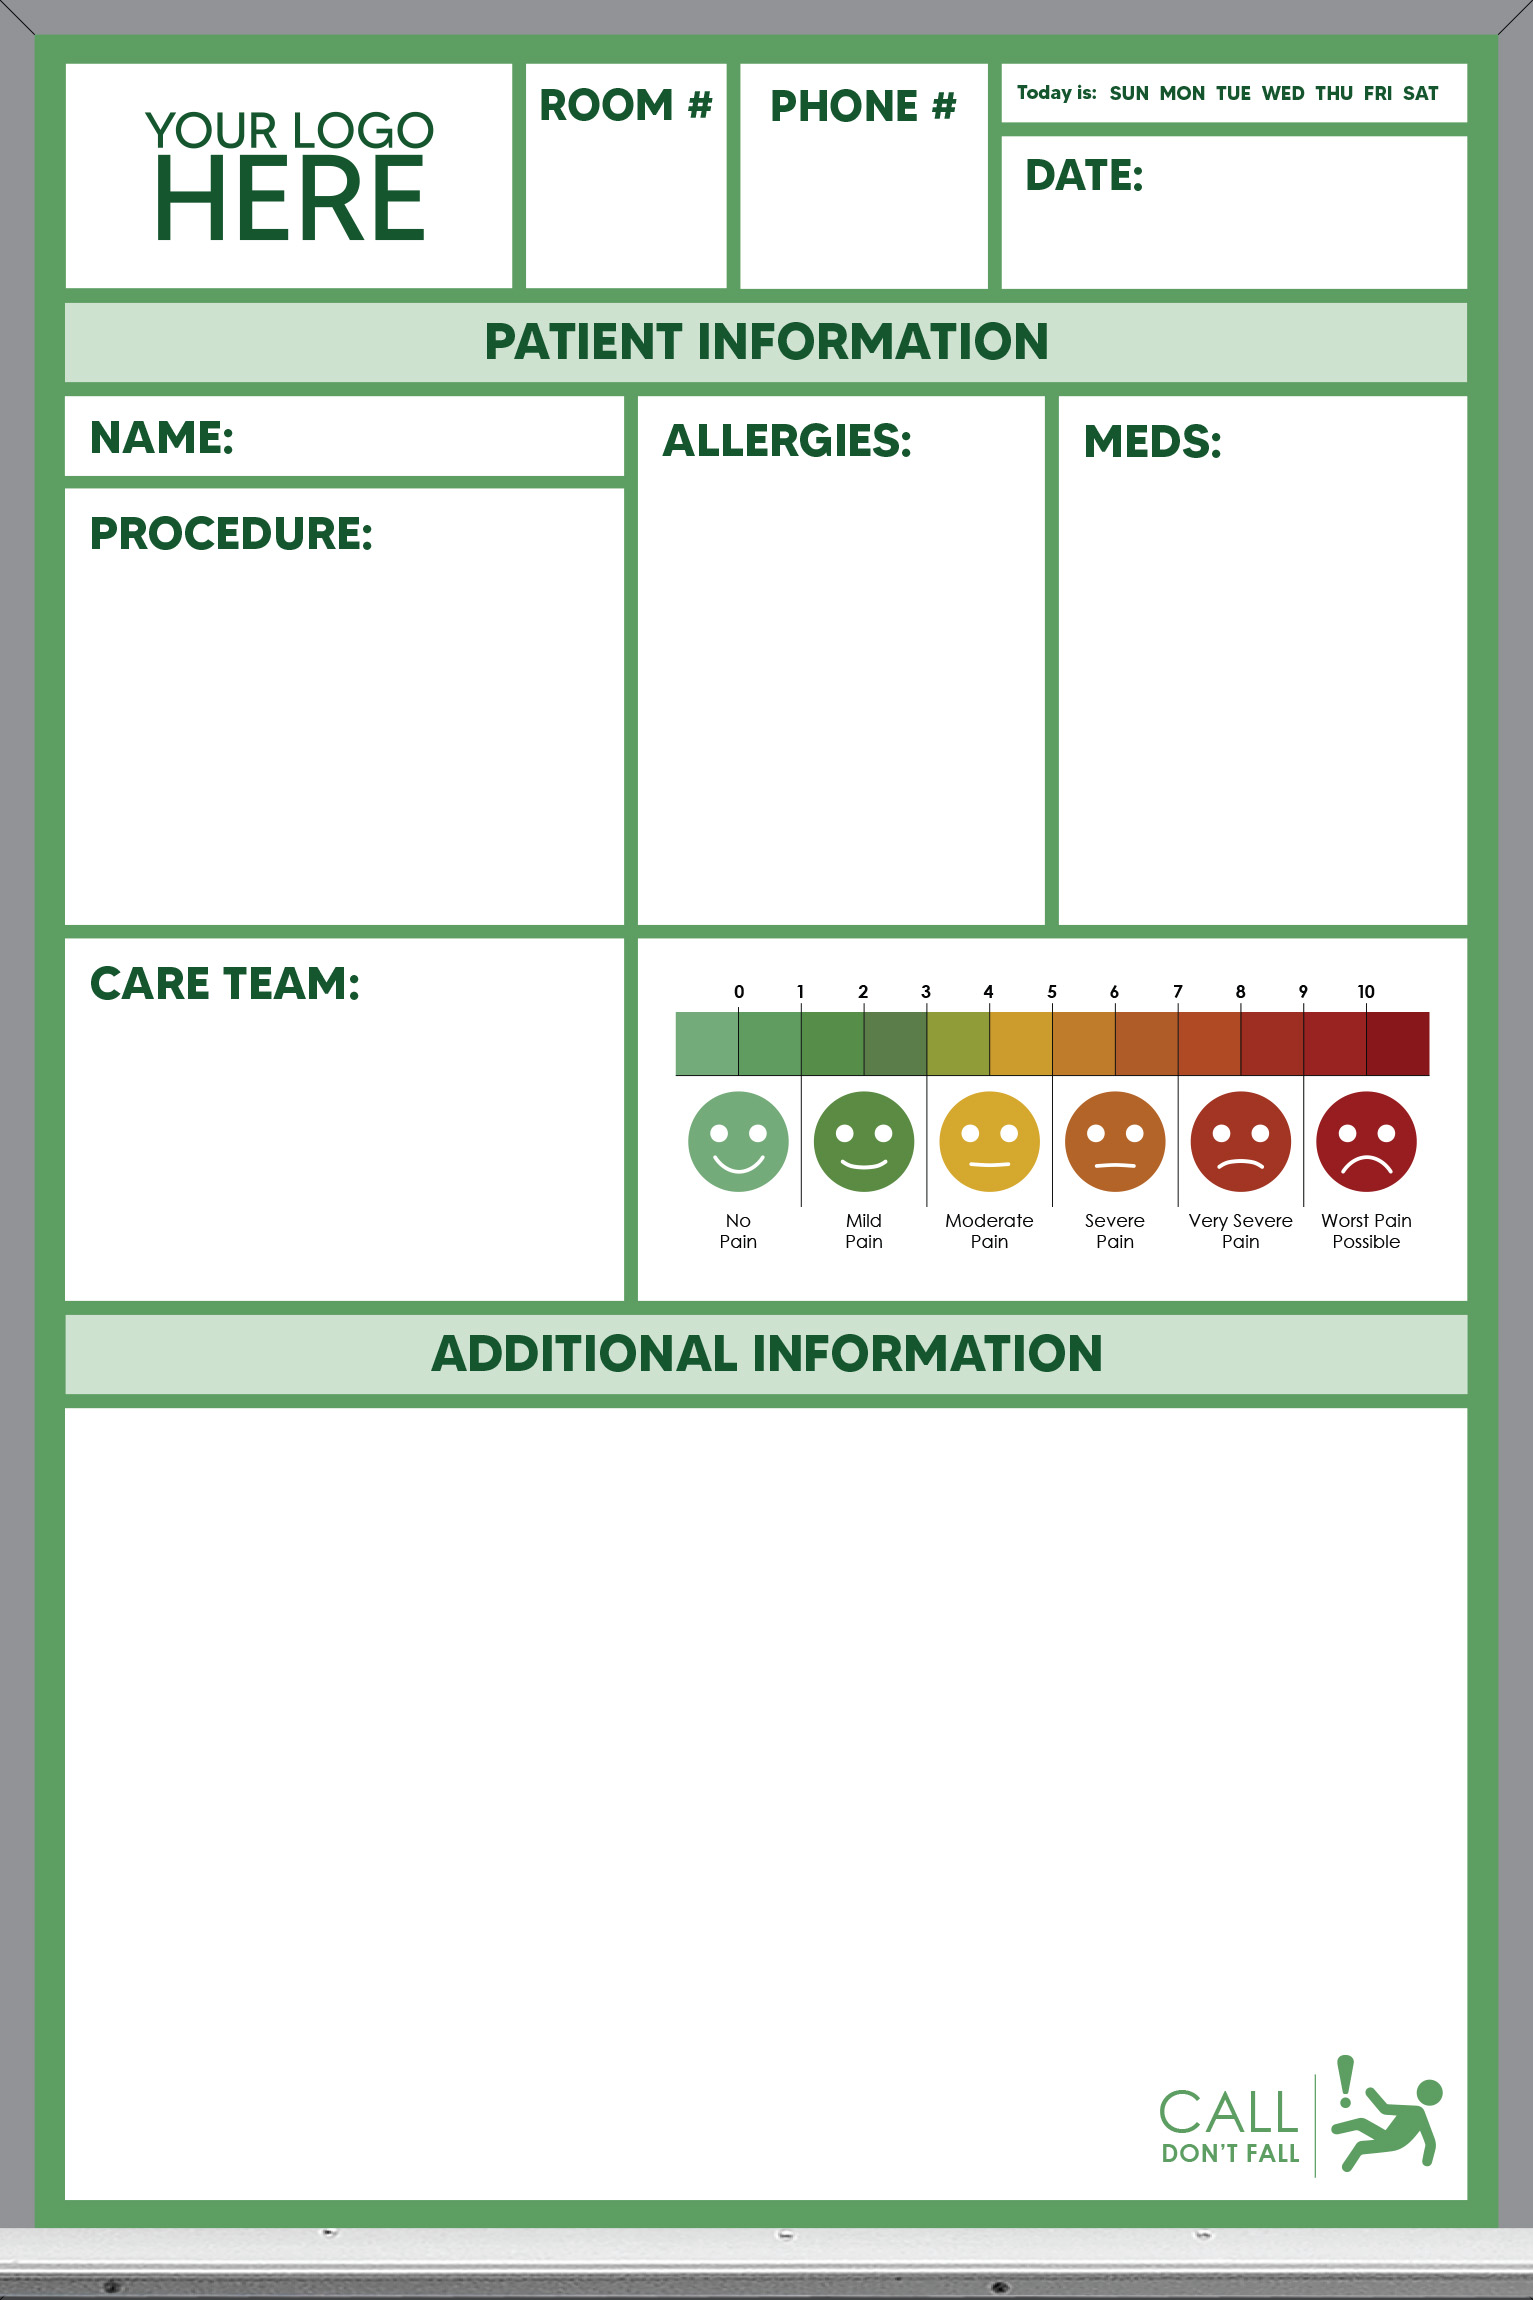 pre-printed patient care whiteboard, green color, 3x2